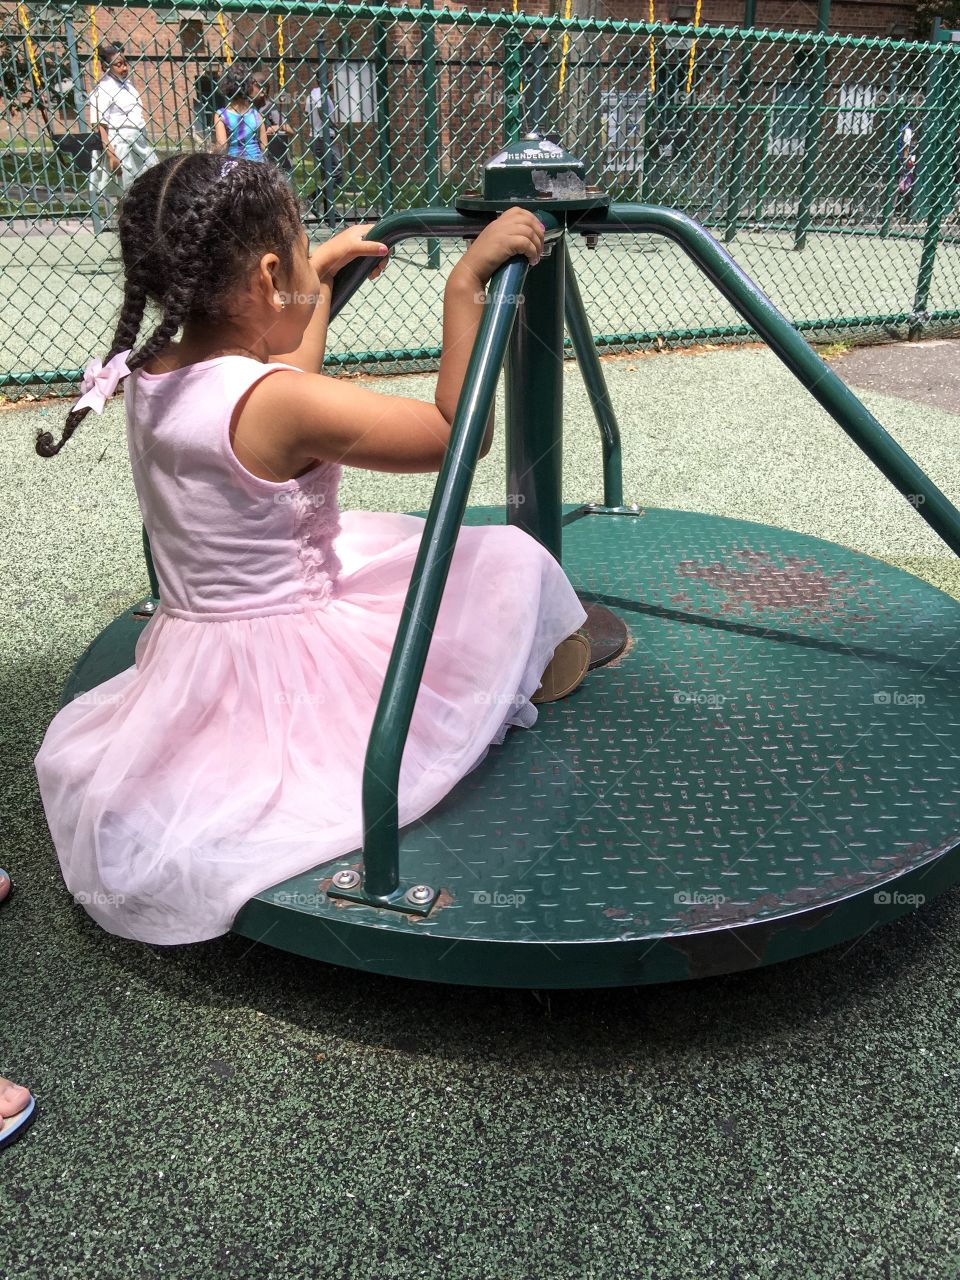 Pretty in Pink at the Playground